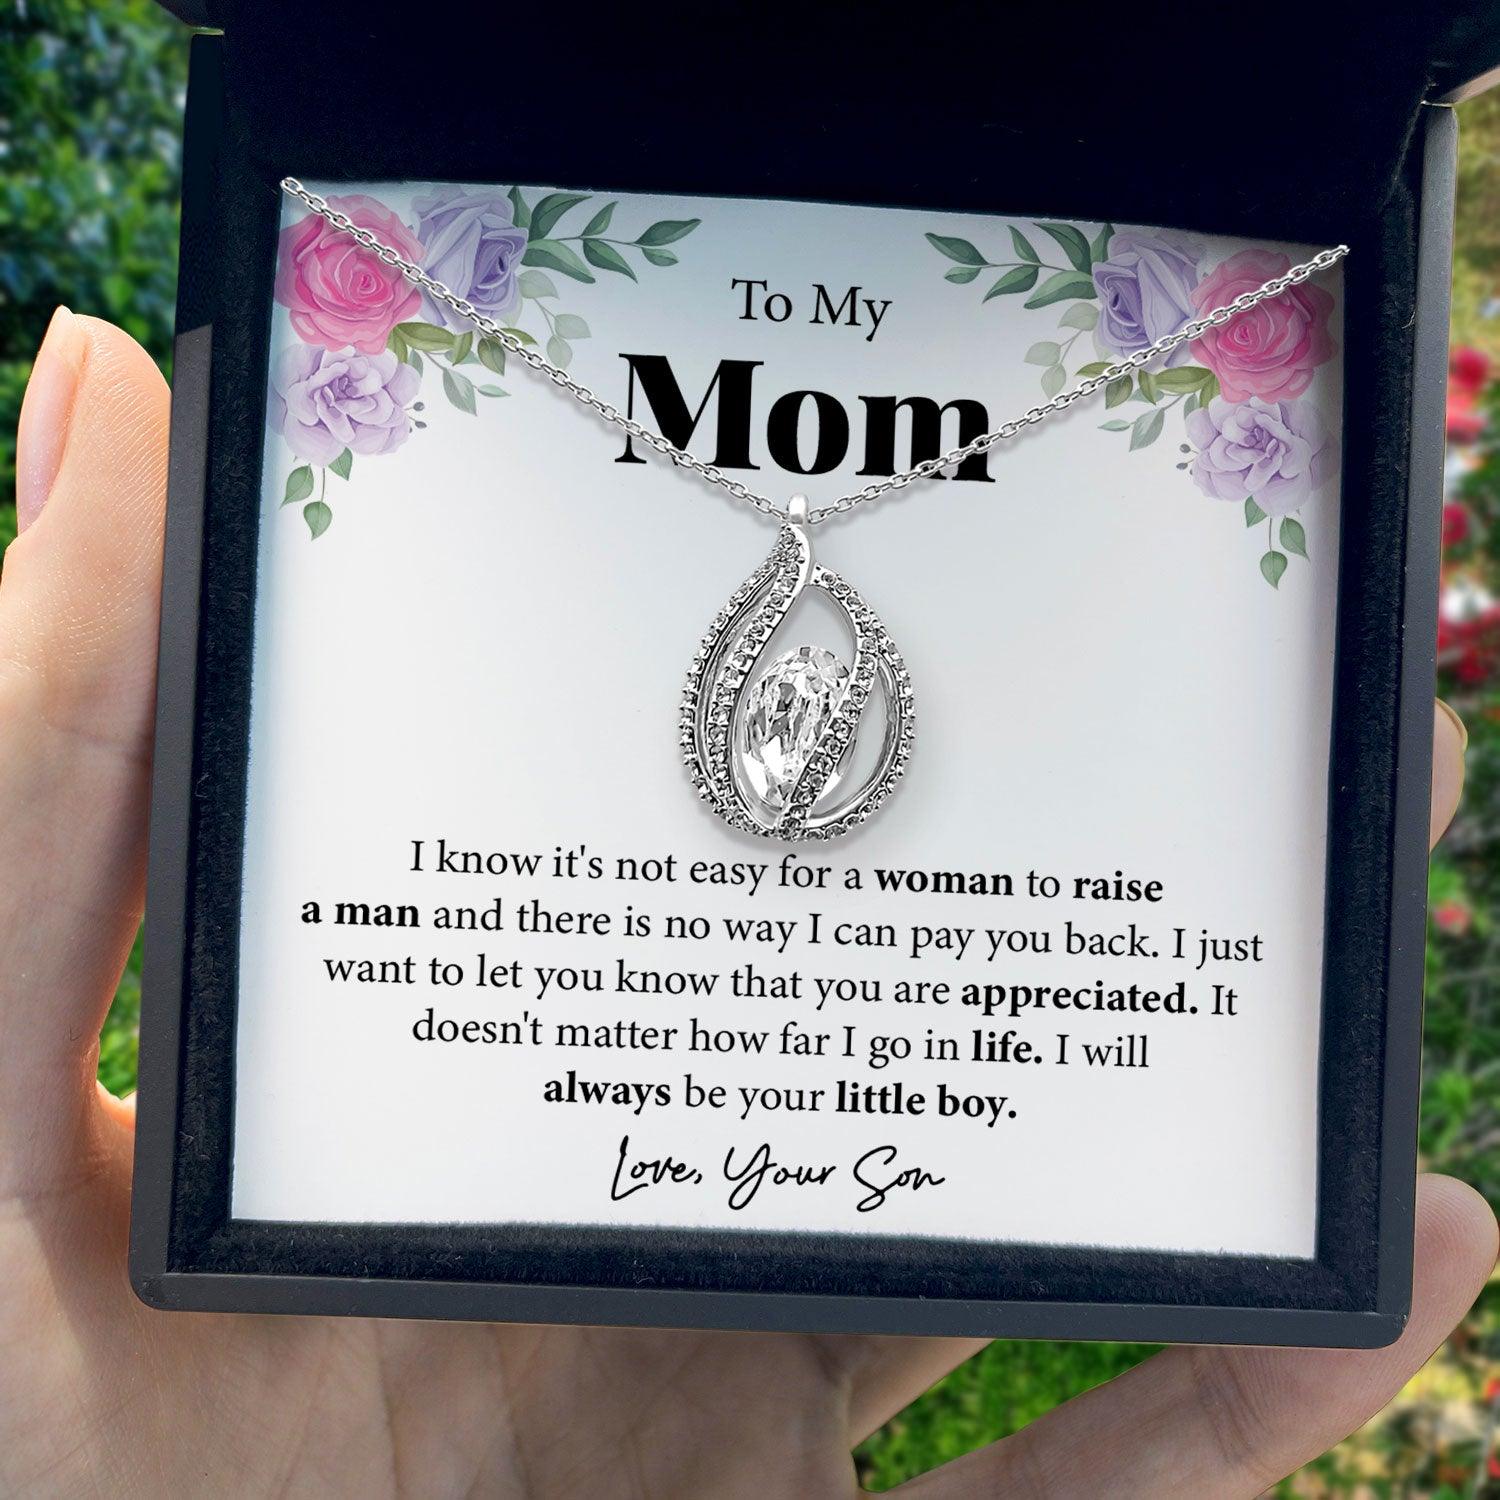 To My Mom - I Just Want To Let You Know That You Are Appreciated - Orbital Birdcage Necklace - TRYNDI